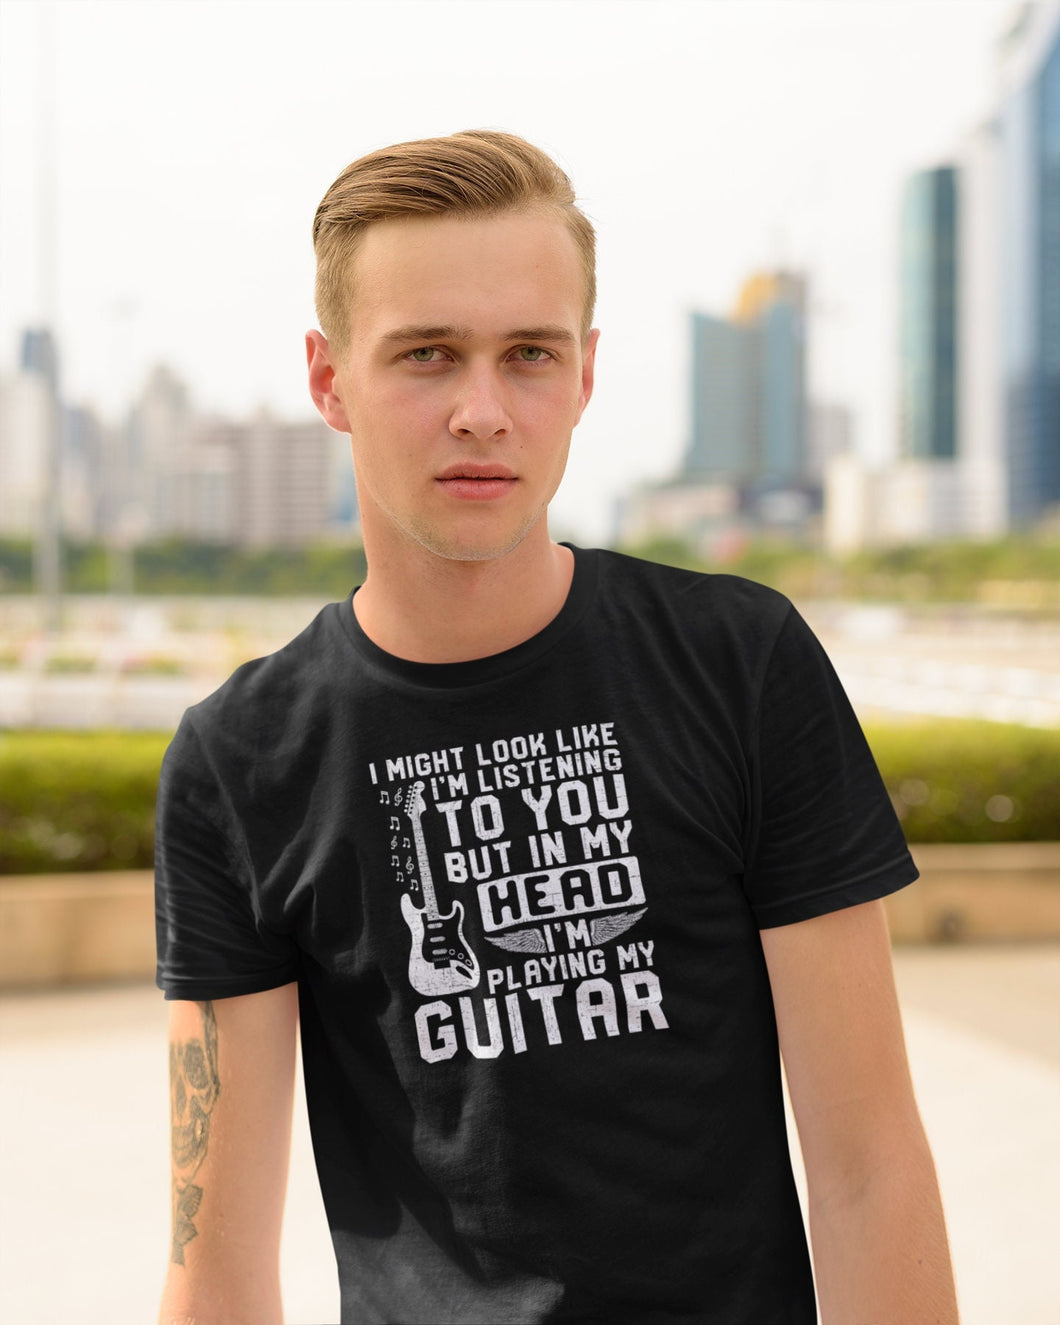 I'm Playing My Guitar Shirt, Guitar Player Gift, I Might Look Like I'm Listening To You But In My Head